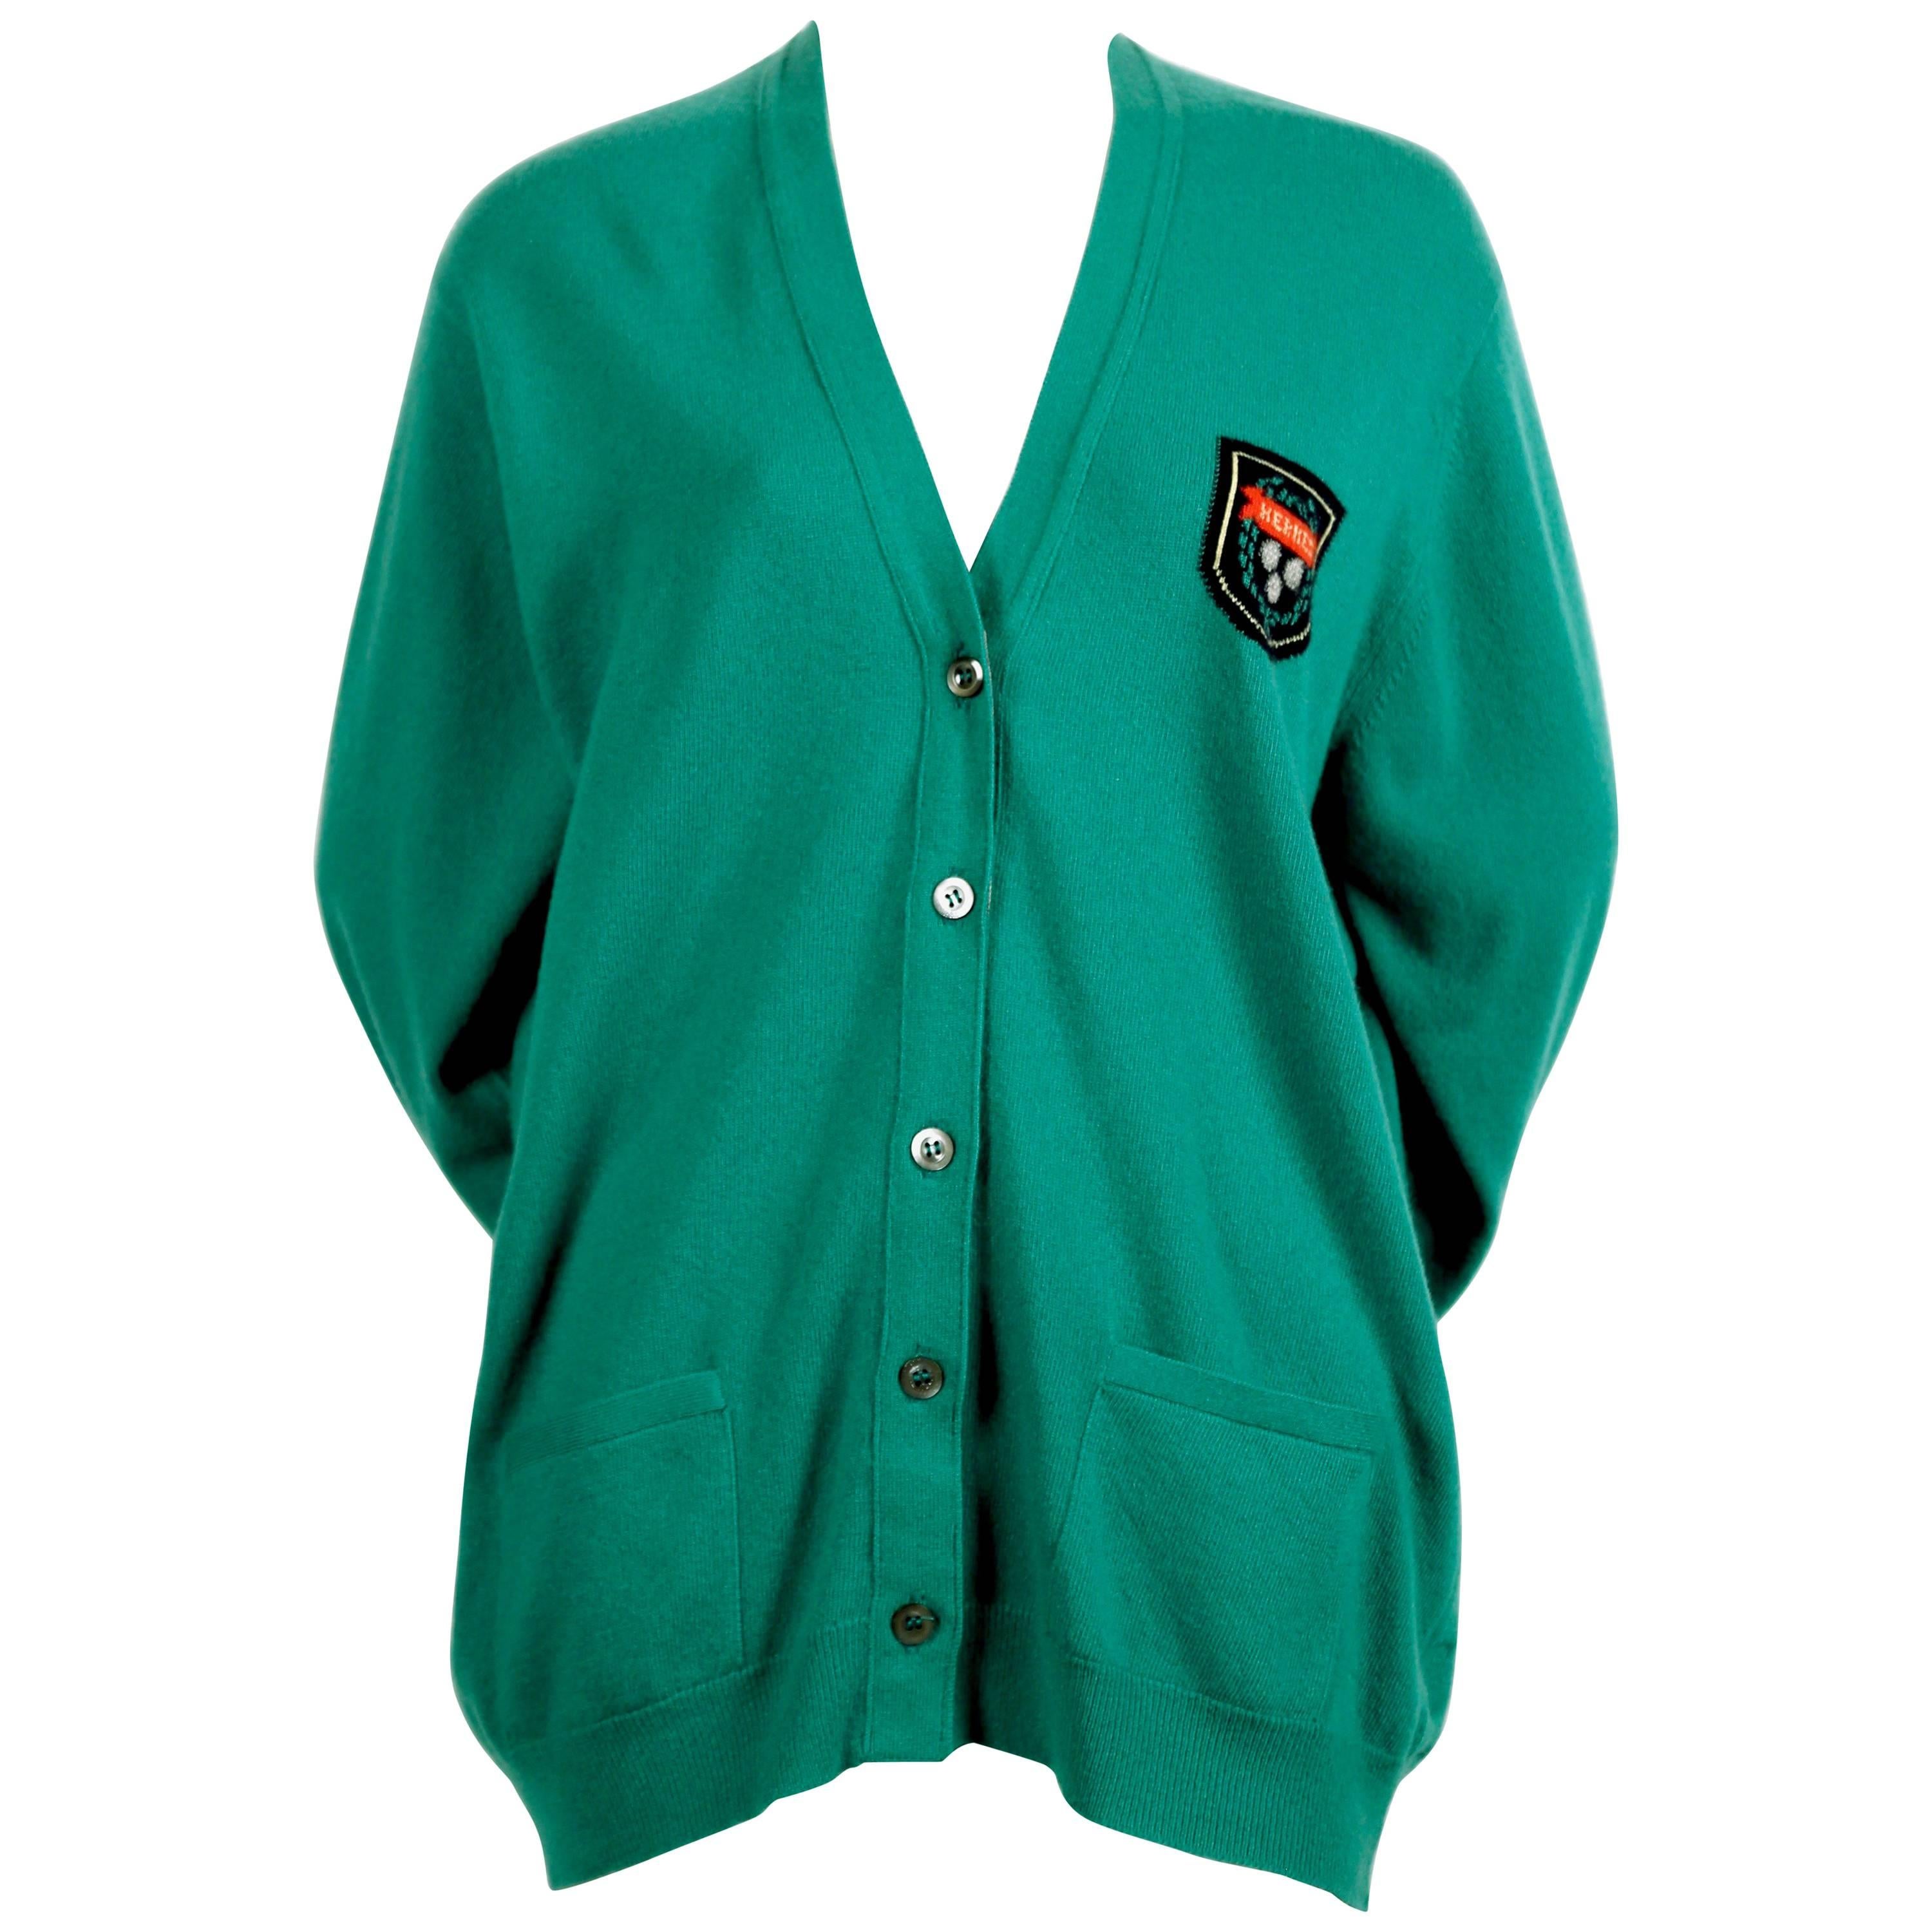 1980's HERMES green cashmere cardigan sweater with tags